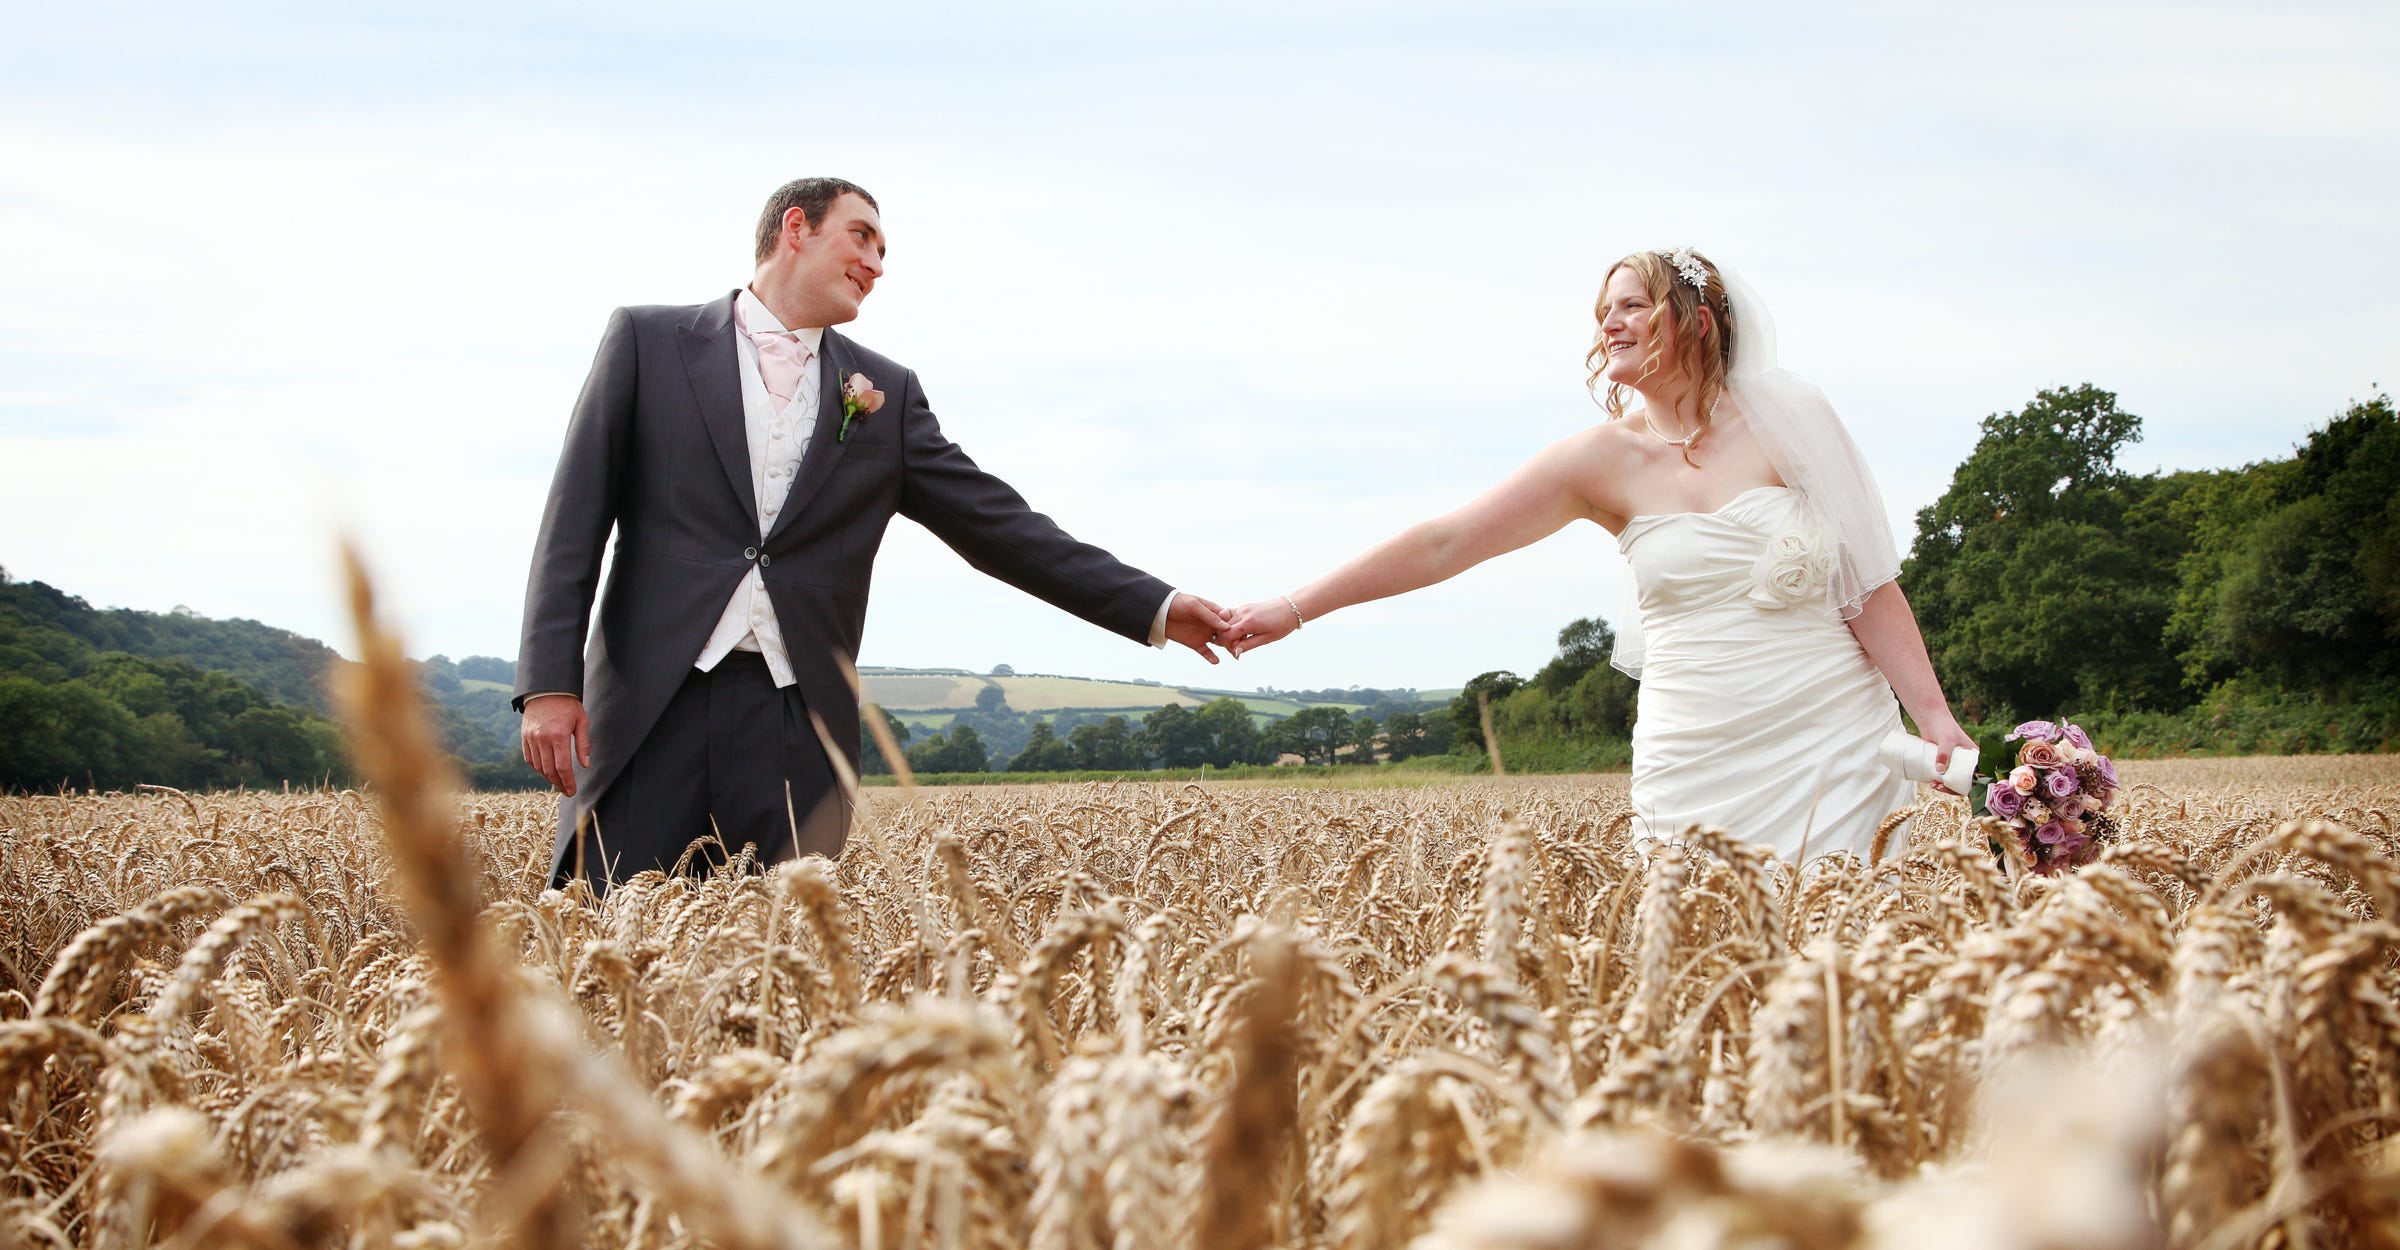 Wedding couple in a corn field by Jayne Poole Photography in North Devon